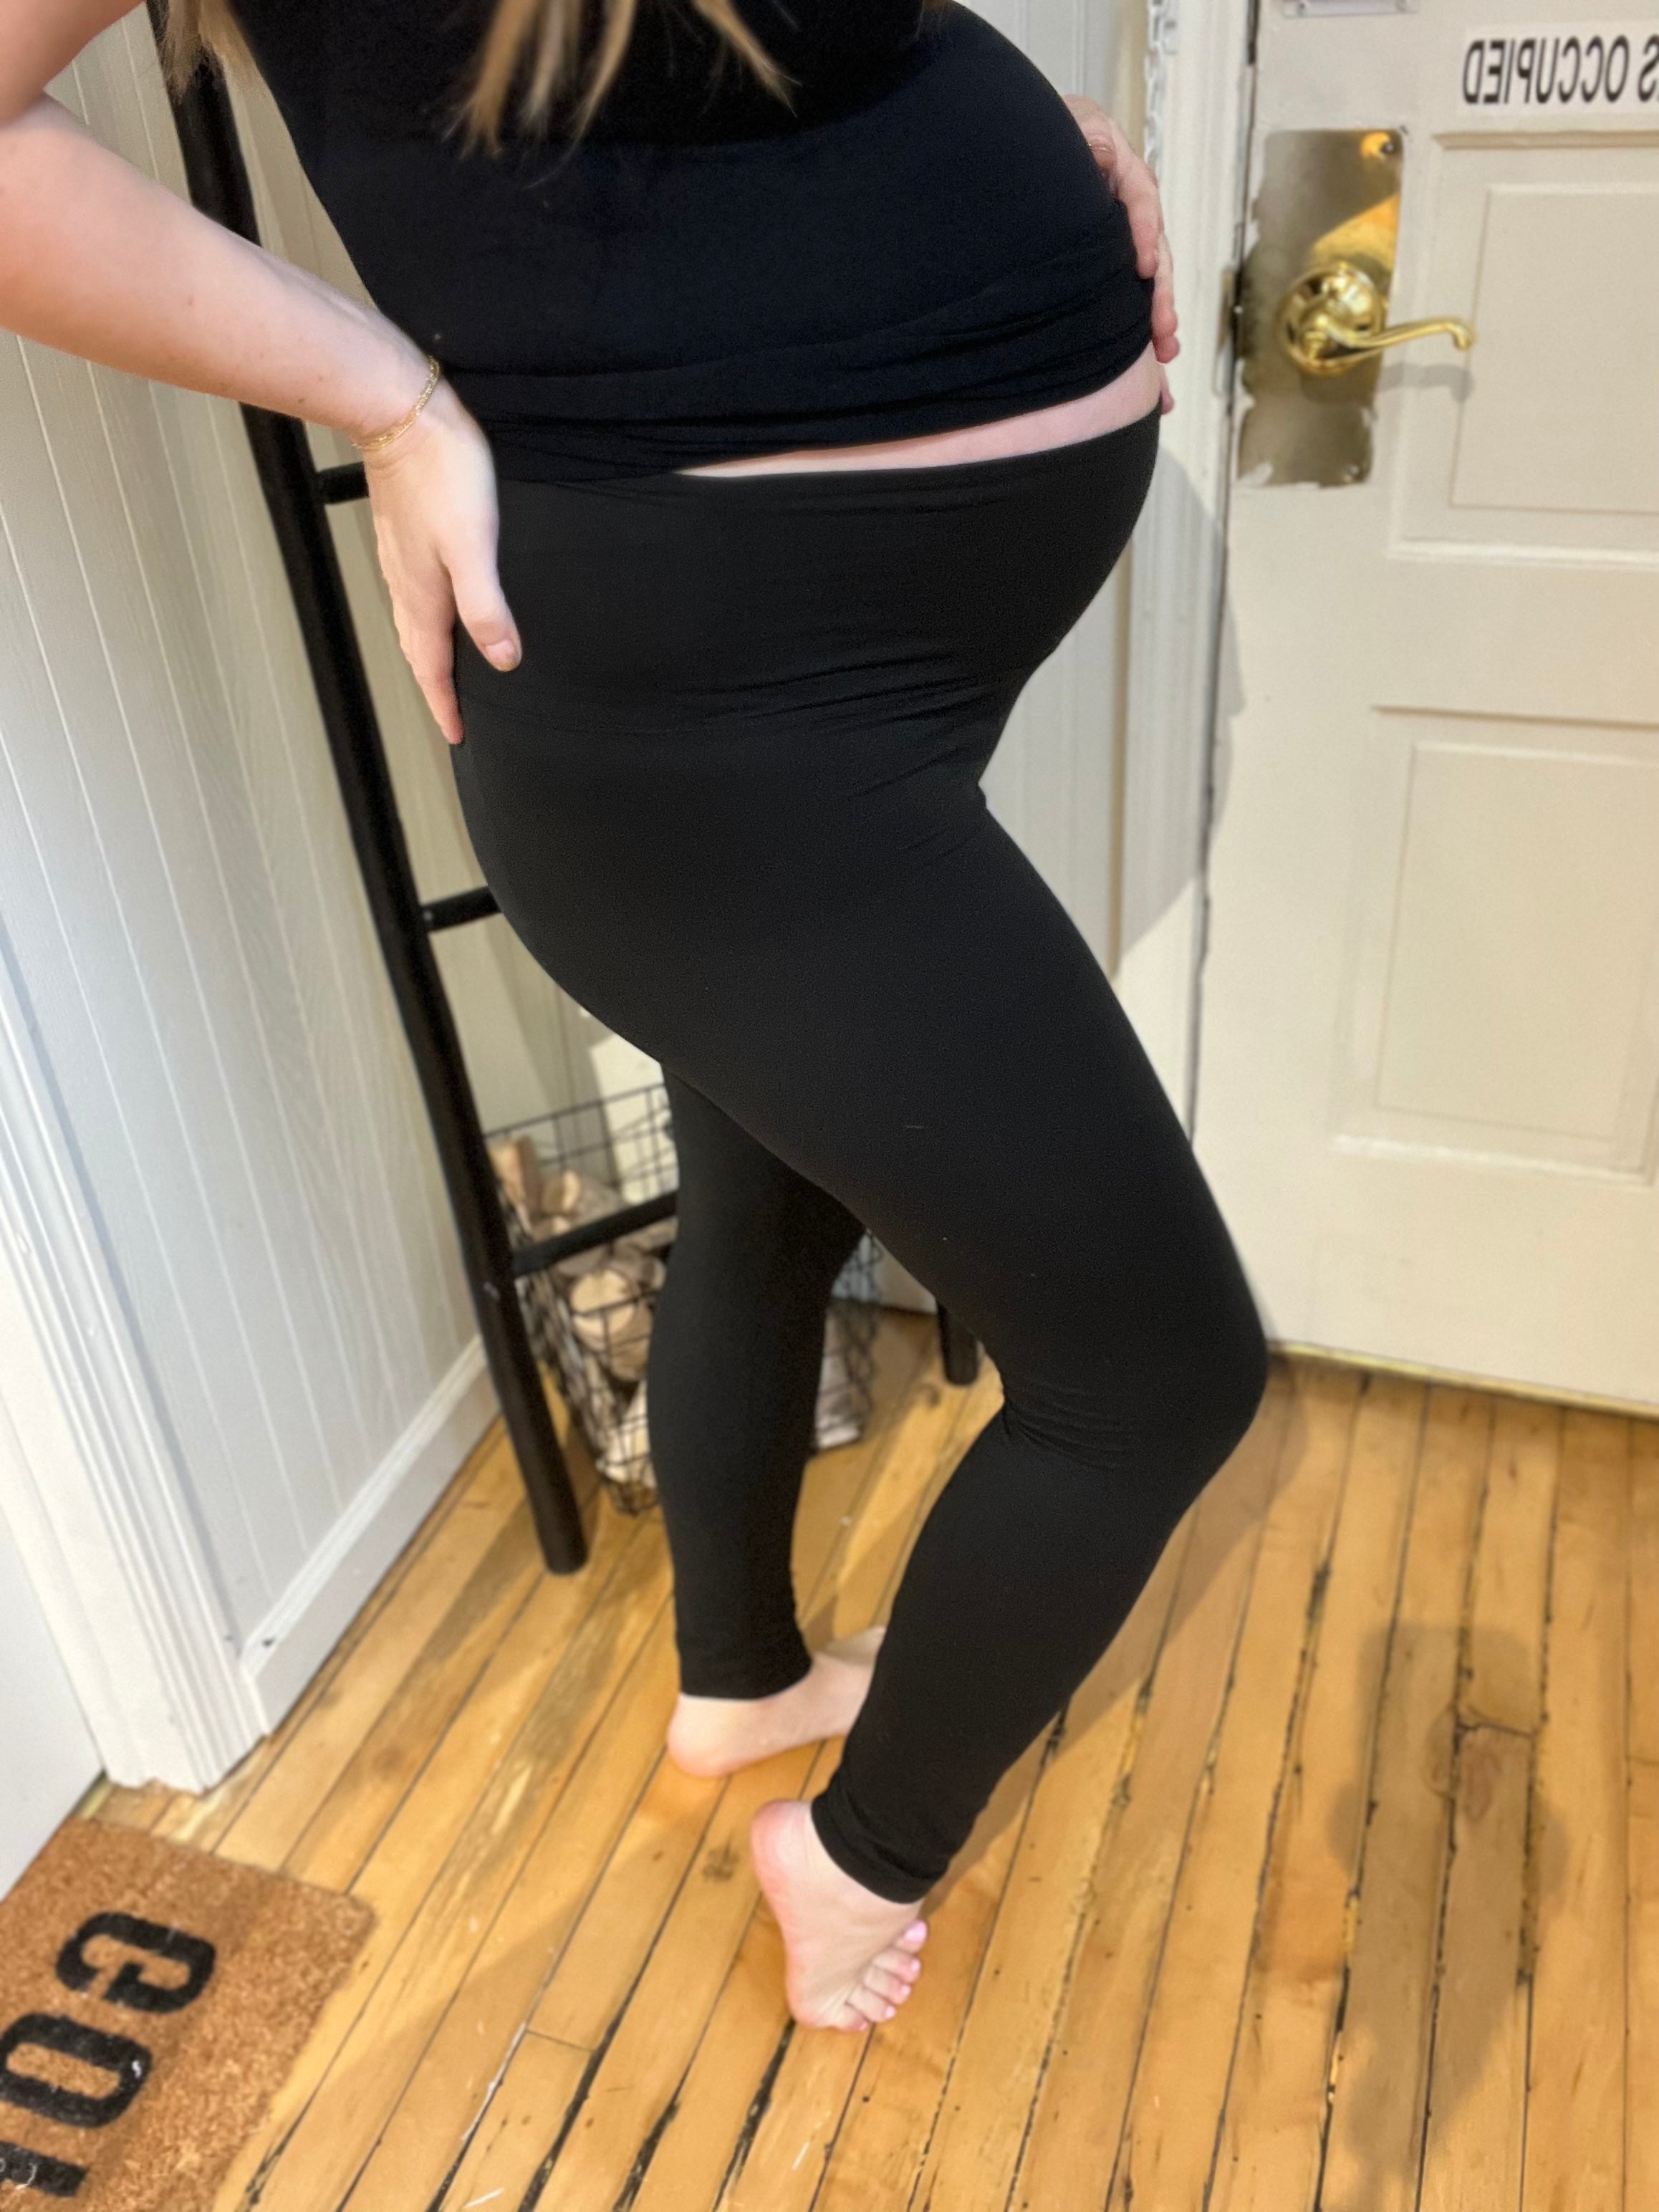 LULU Align High Rise Fast And Free Buttery Soft Leggings Gym Wear Women  Nylon Winter Sports Tights Stretch Slim Yoga Pants With Pocket LEMONS From  Fruqa, $25.97 | DHgate.Com